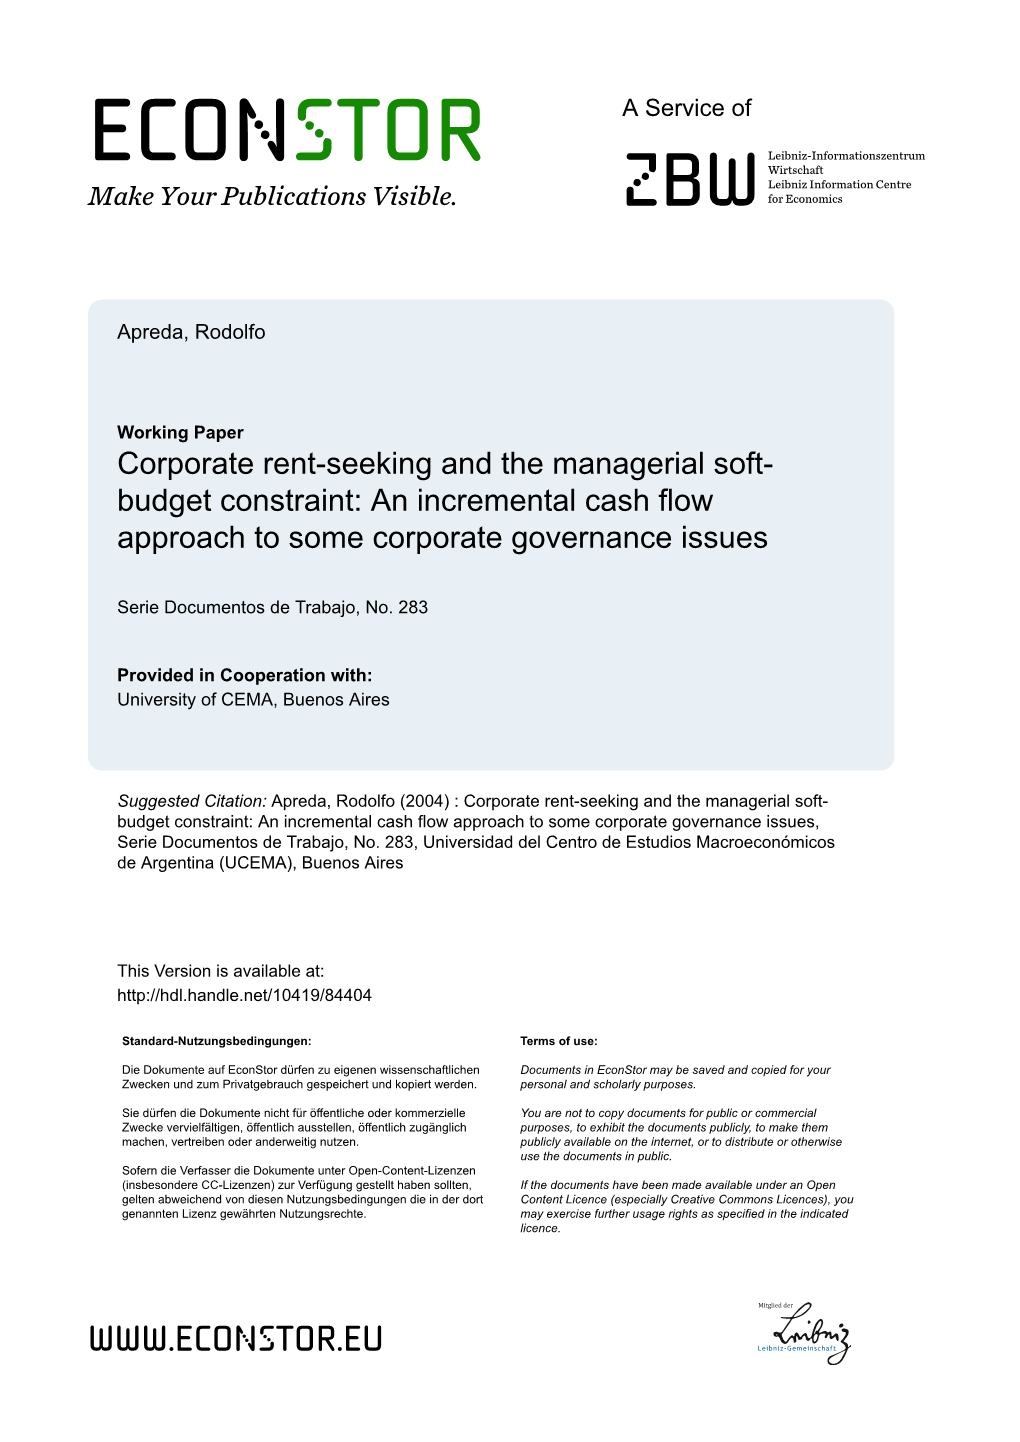 Corporate Rent-Seeking and the Managerial Soft-Budget Constraint Are Well-Defined Subjects to Be Embedded Into the Realm of Corporate Governance